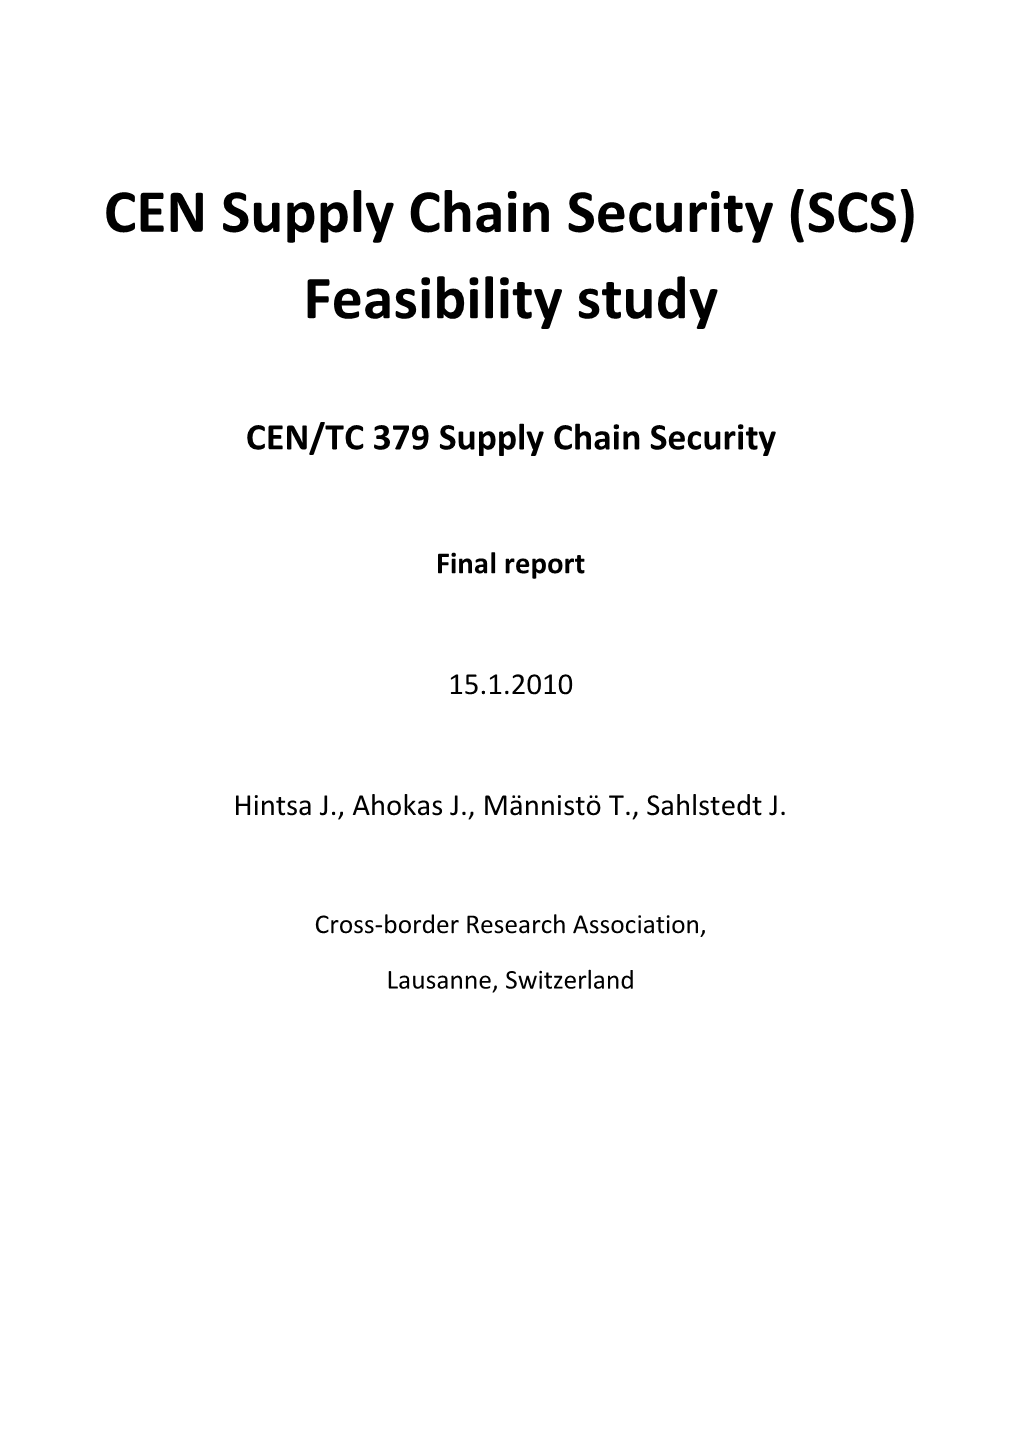 CEN Supply Chain Security (SCS) Feasibility Study